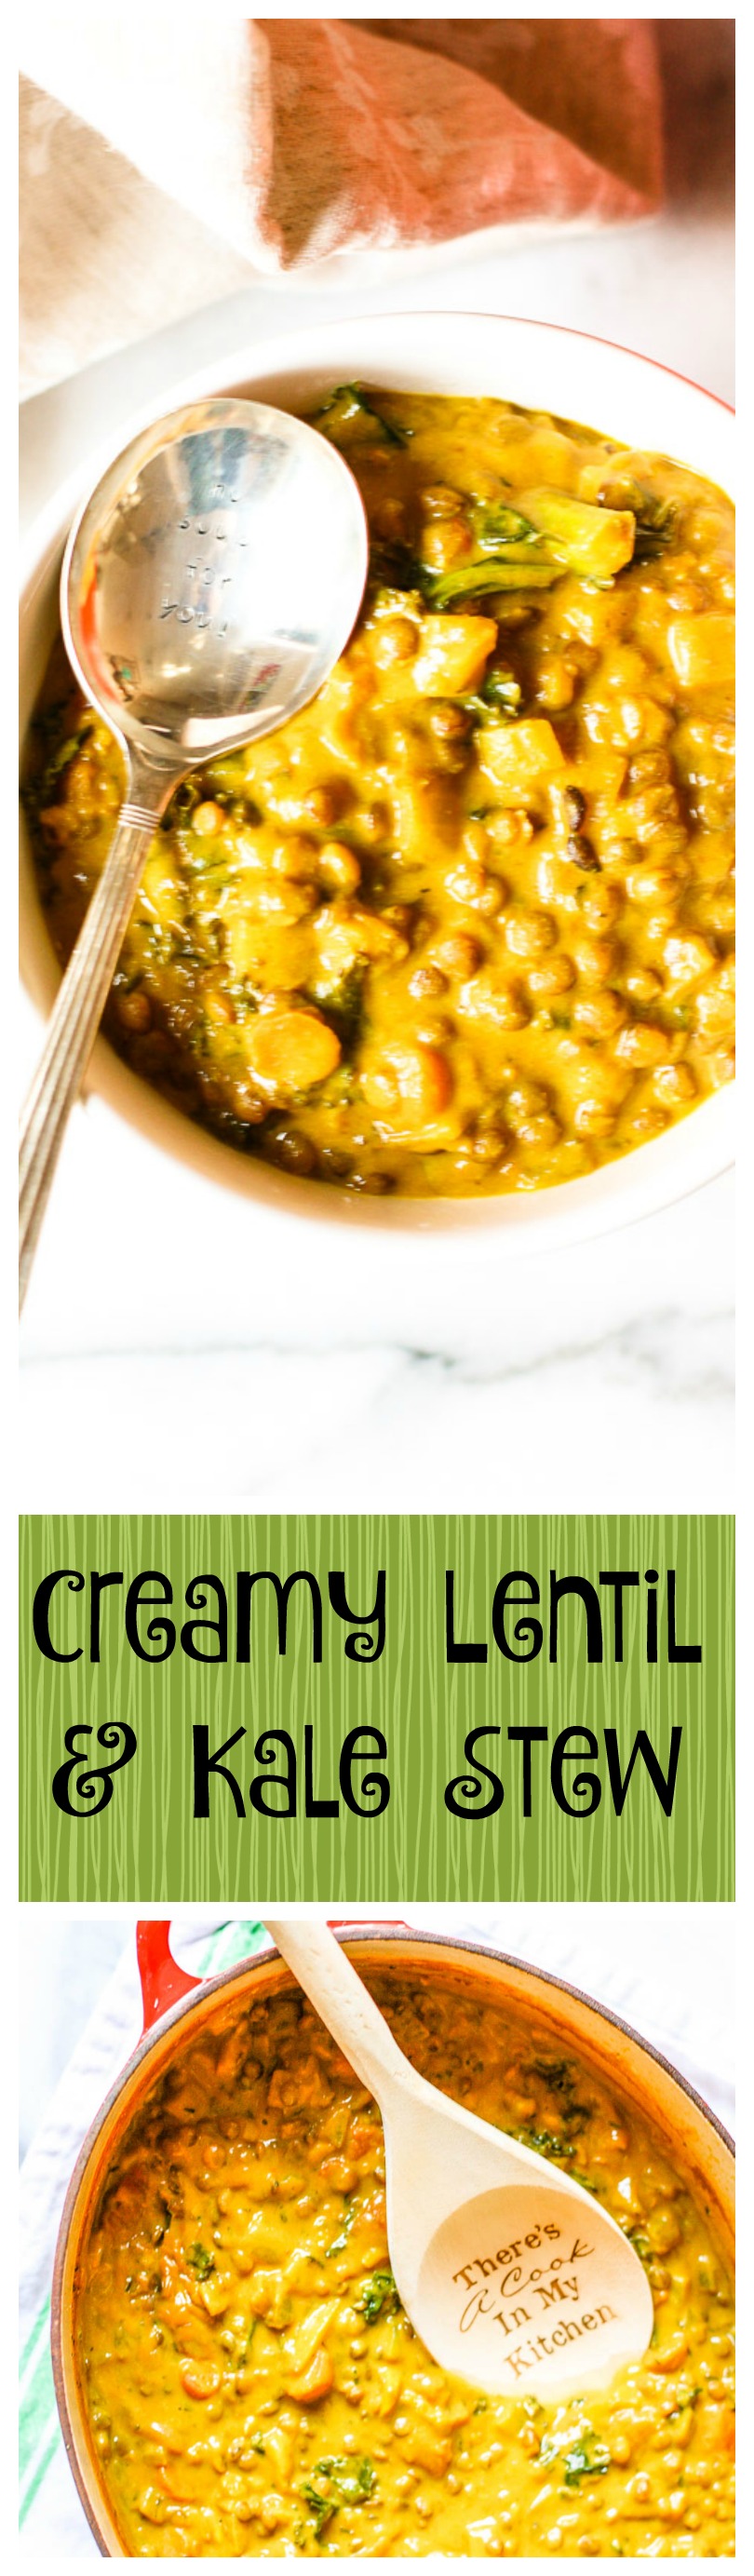 creamy lentil and kale stew